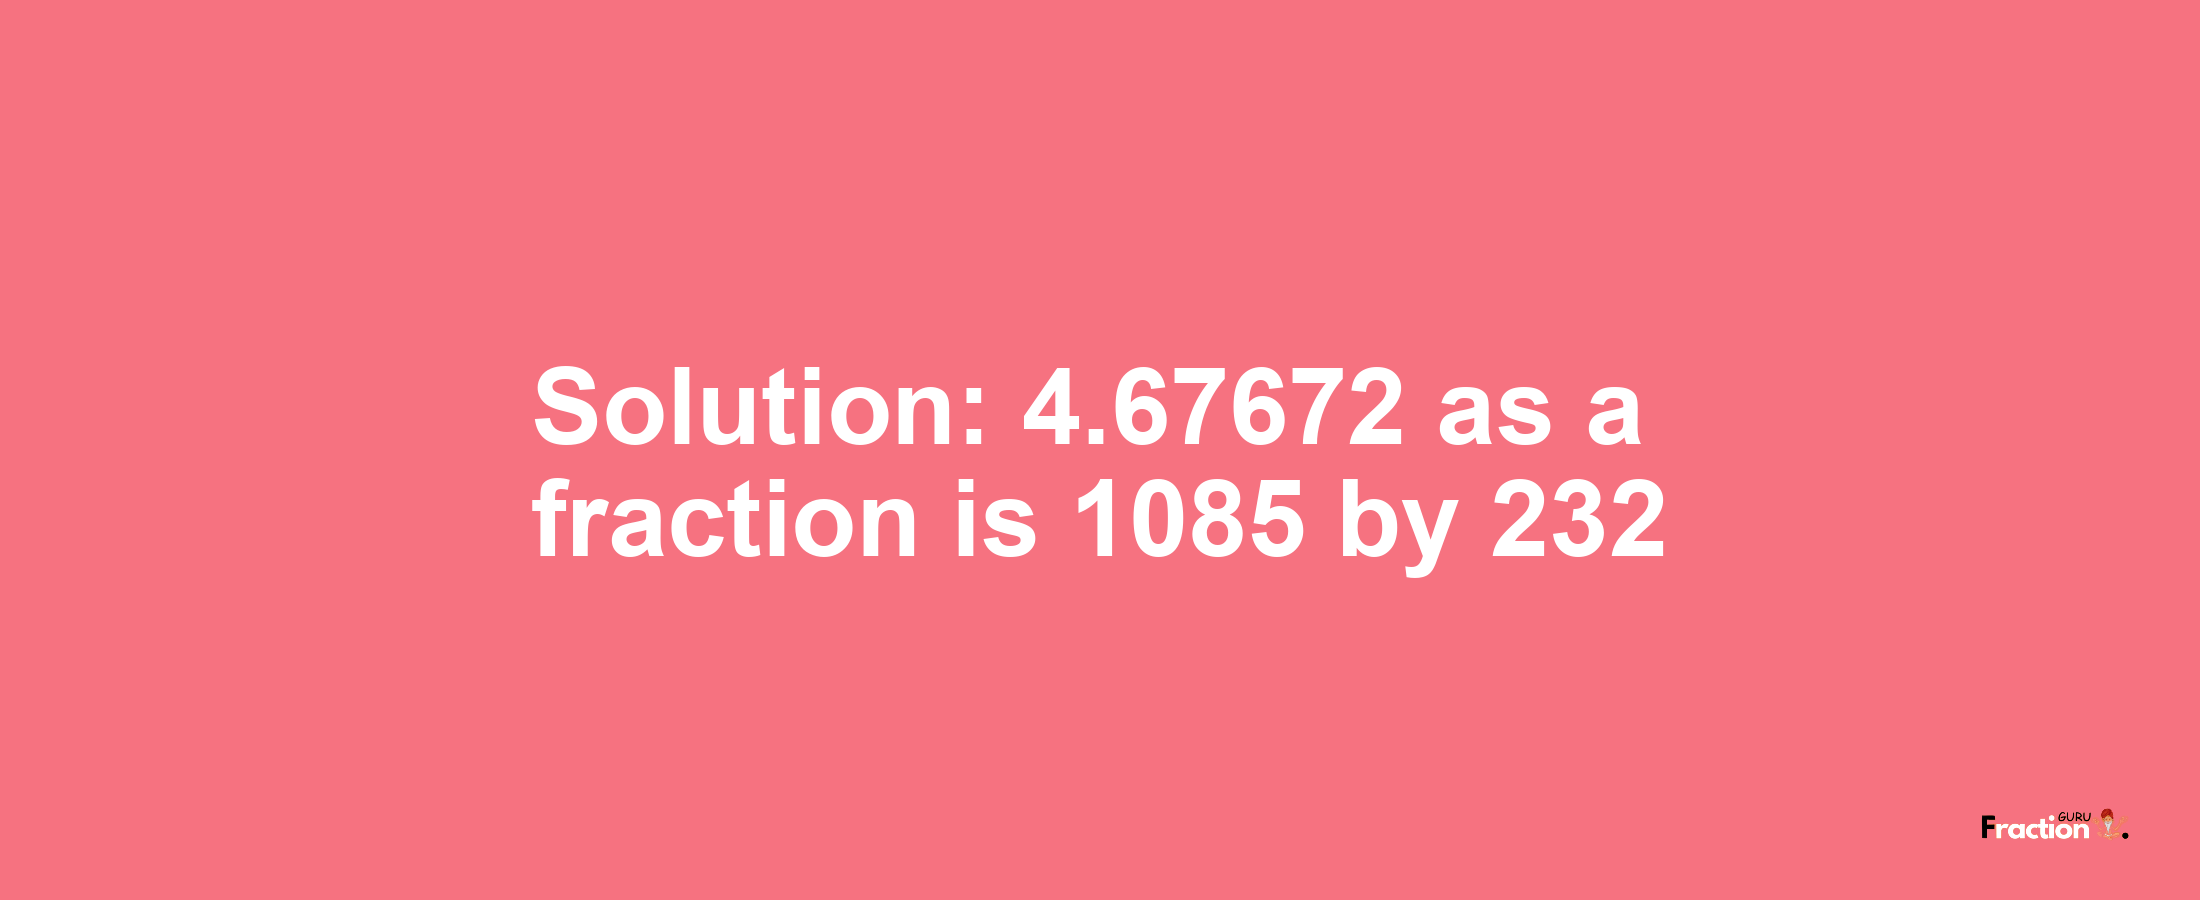 Solution:4.67672 as a fraction is 1085/232